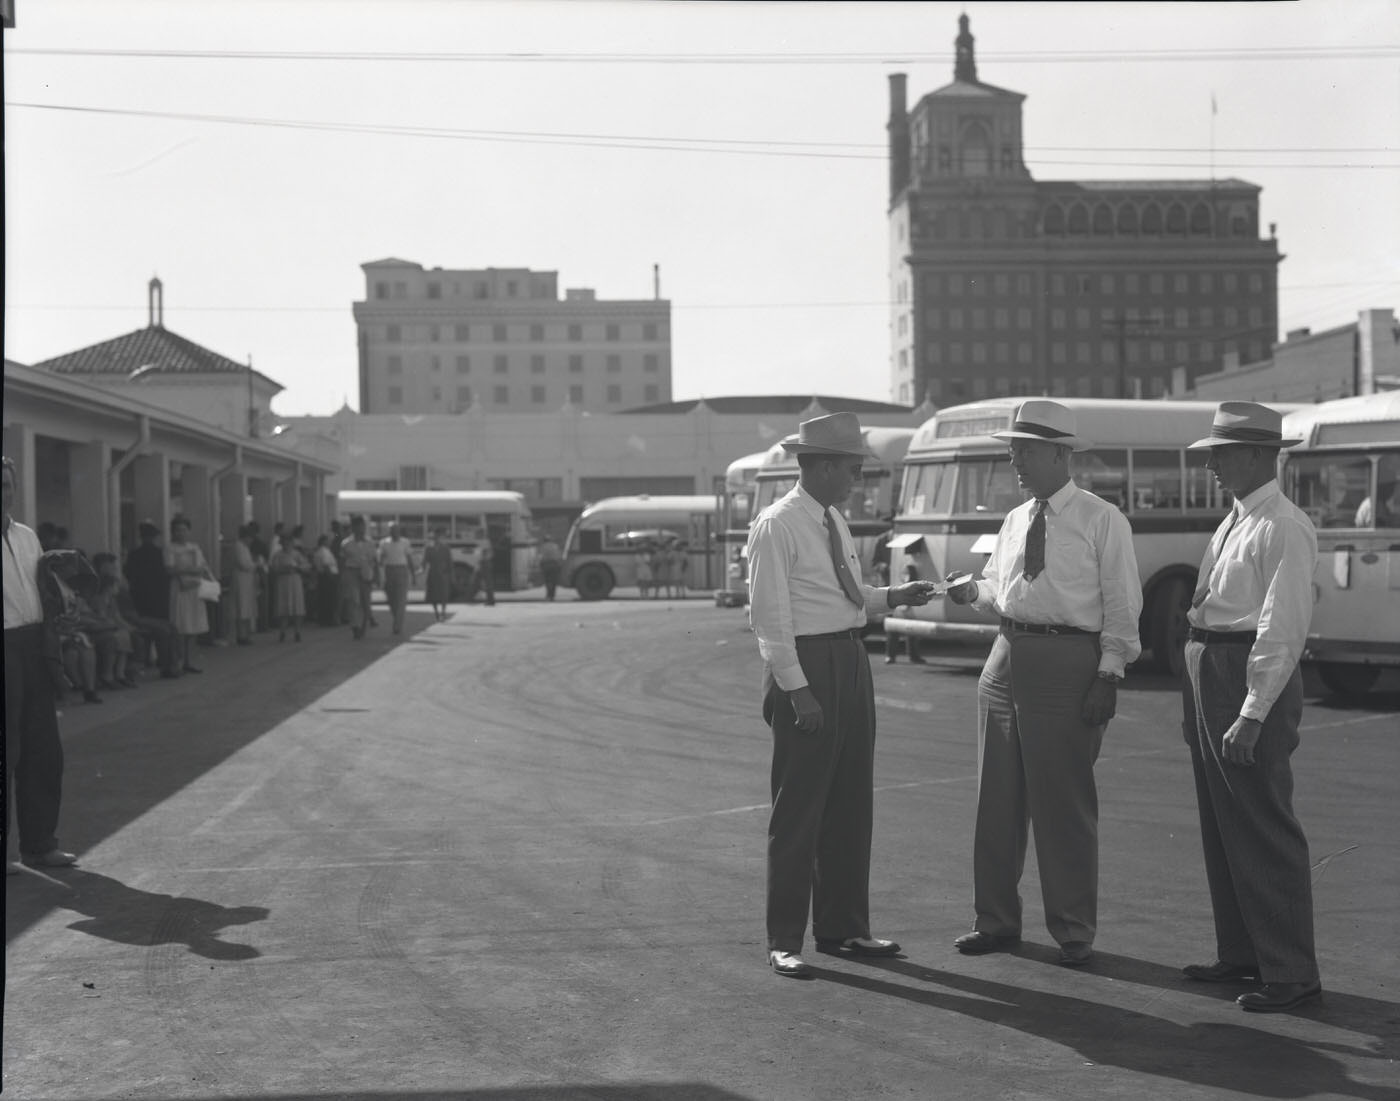 Menderson Bus Lines Buses with Three Men in Foreground, 1945